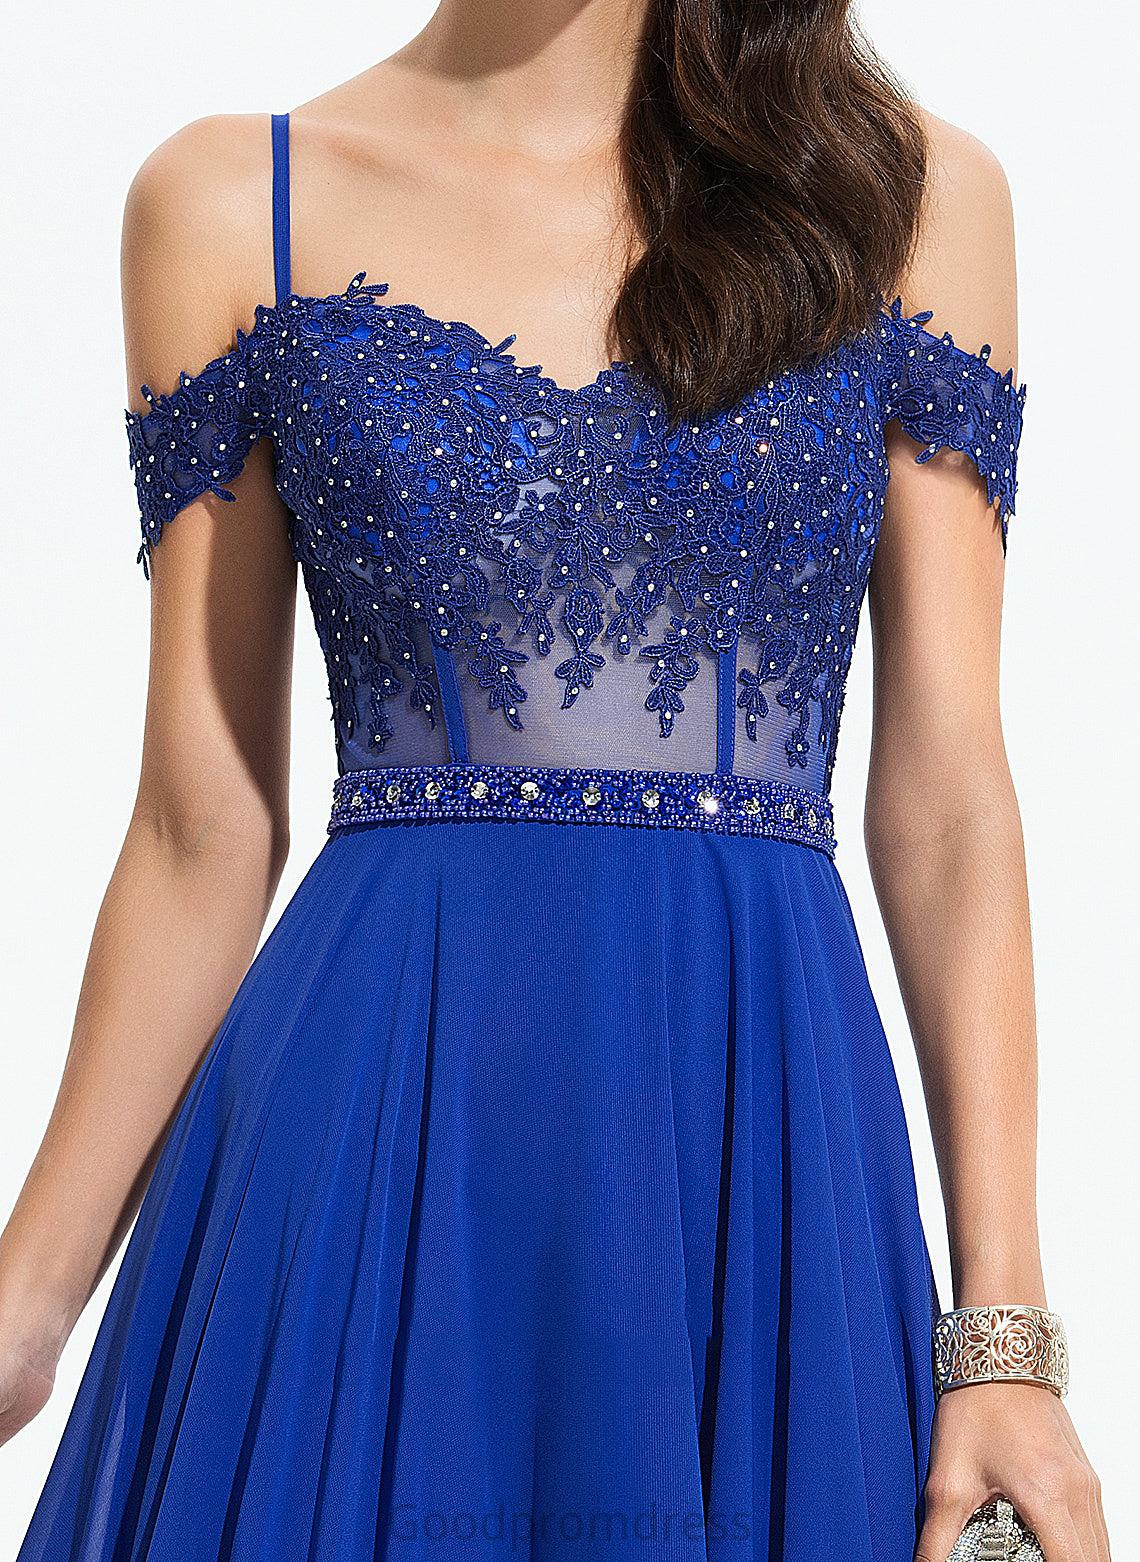 Sweetheart With Chiffon Off-the-Shoulder Sequins Mariah Beading Prom Dresses A-Line Floor-Length